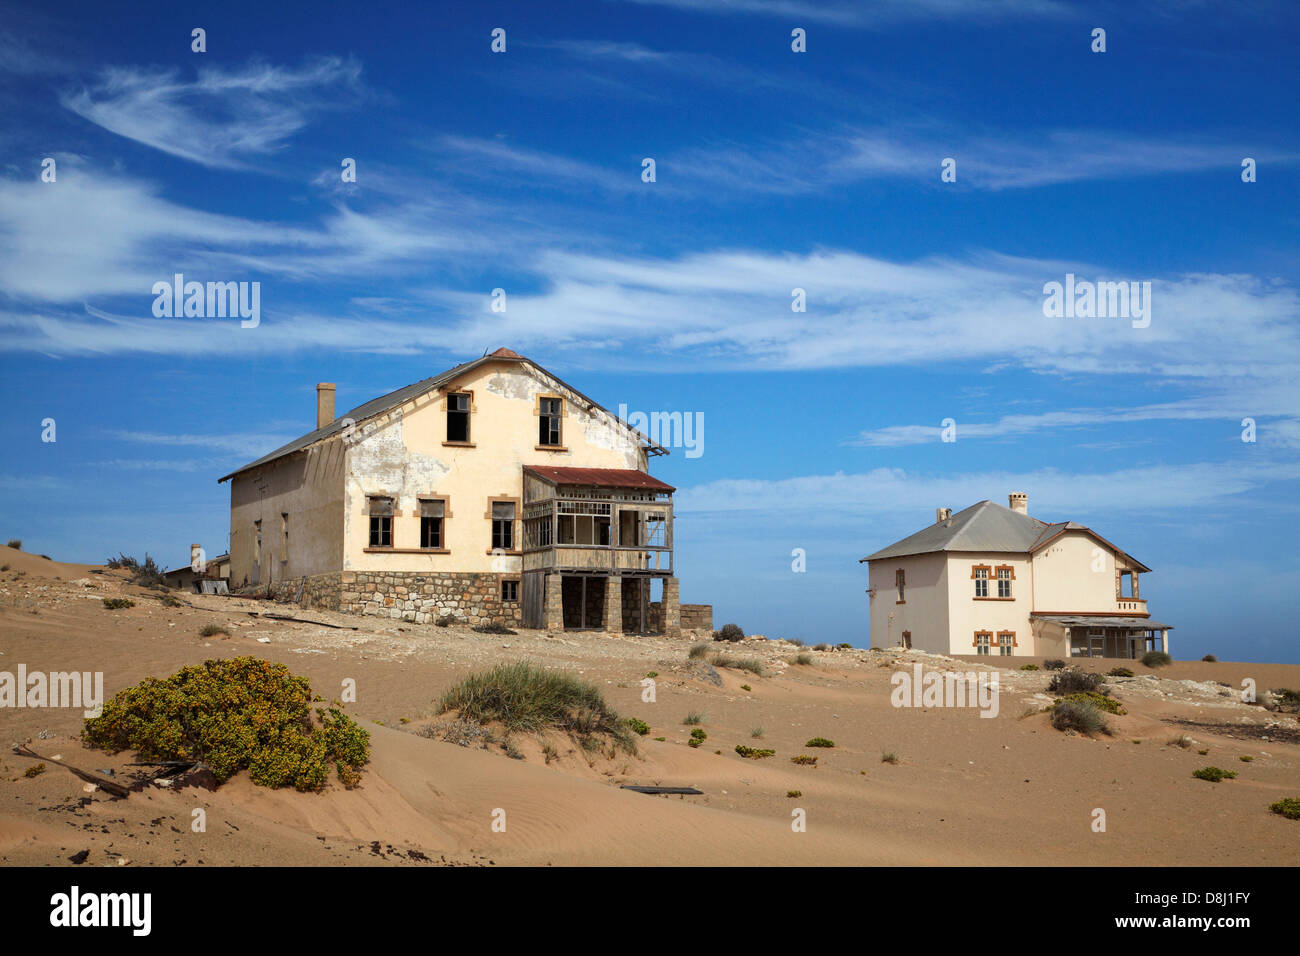 Architect's and Manager's Houses, Kolmanskop Ghost Town, near Luderitz, Namibia, Africa Stock Photo